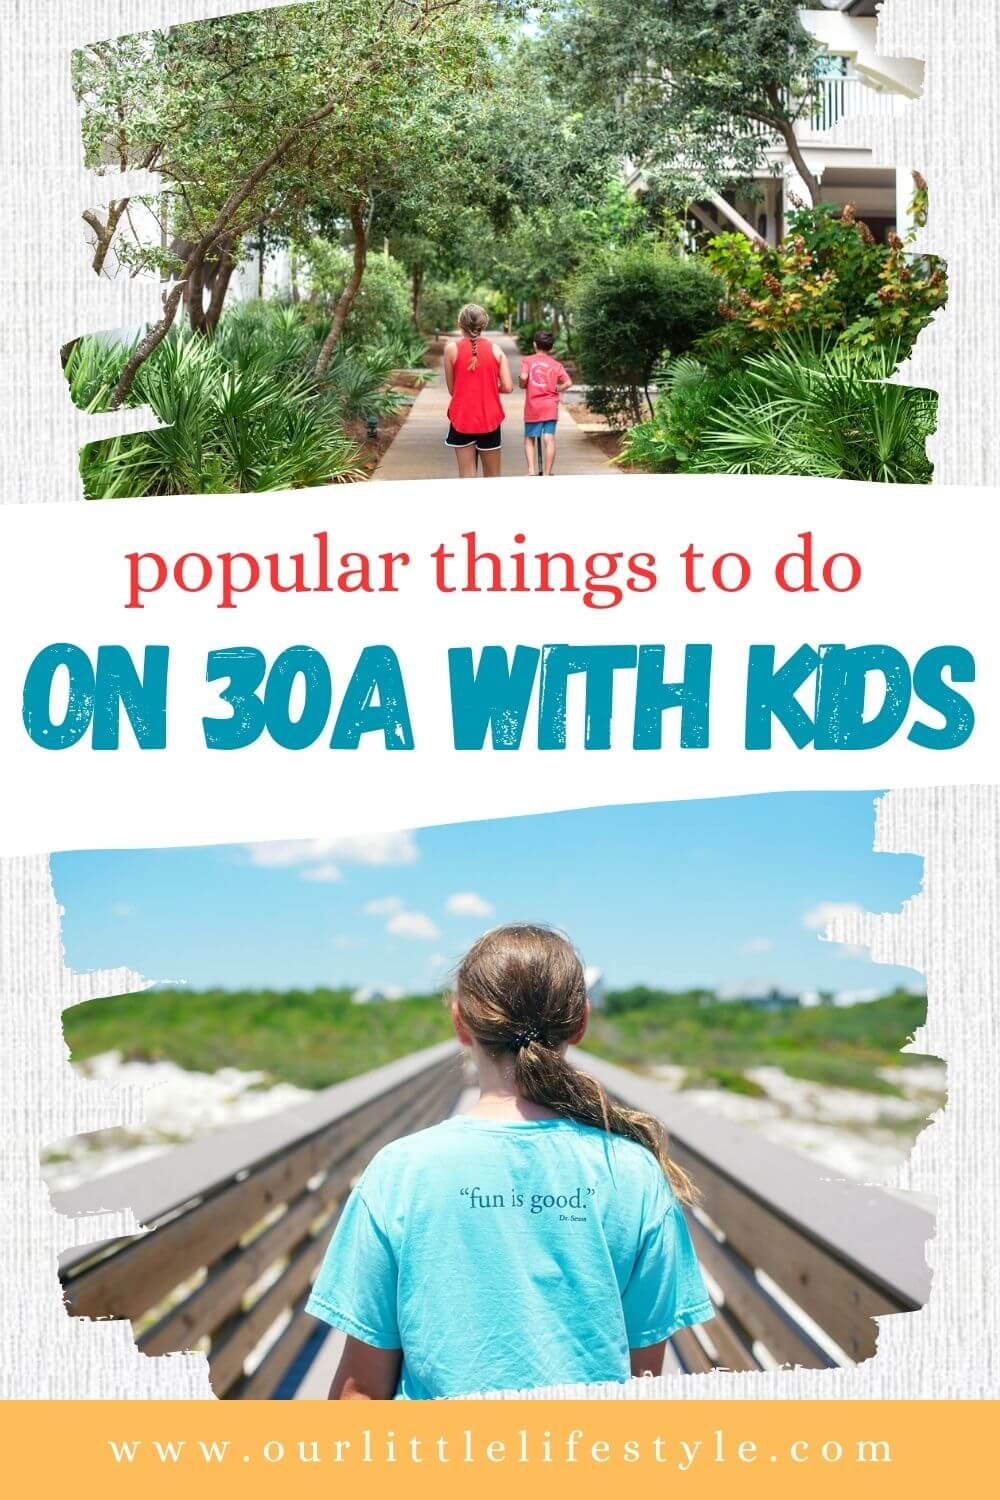 Popular Things to do on 30A families